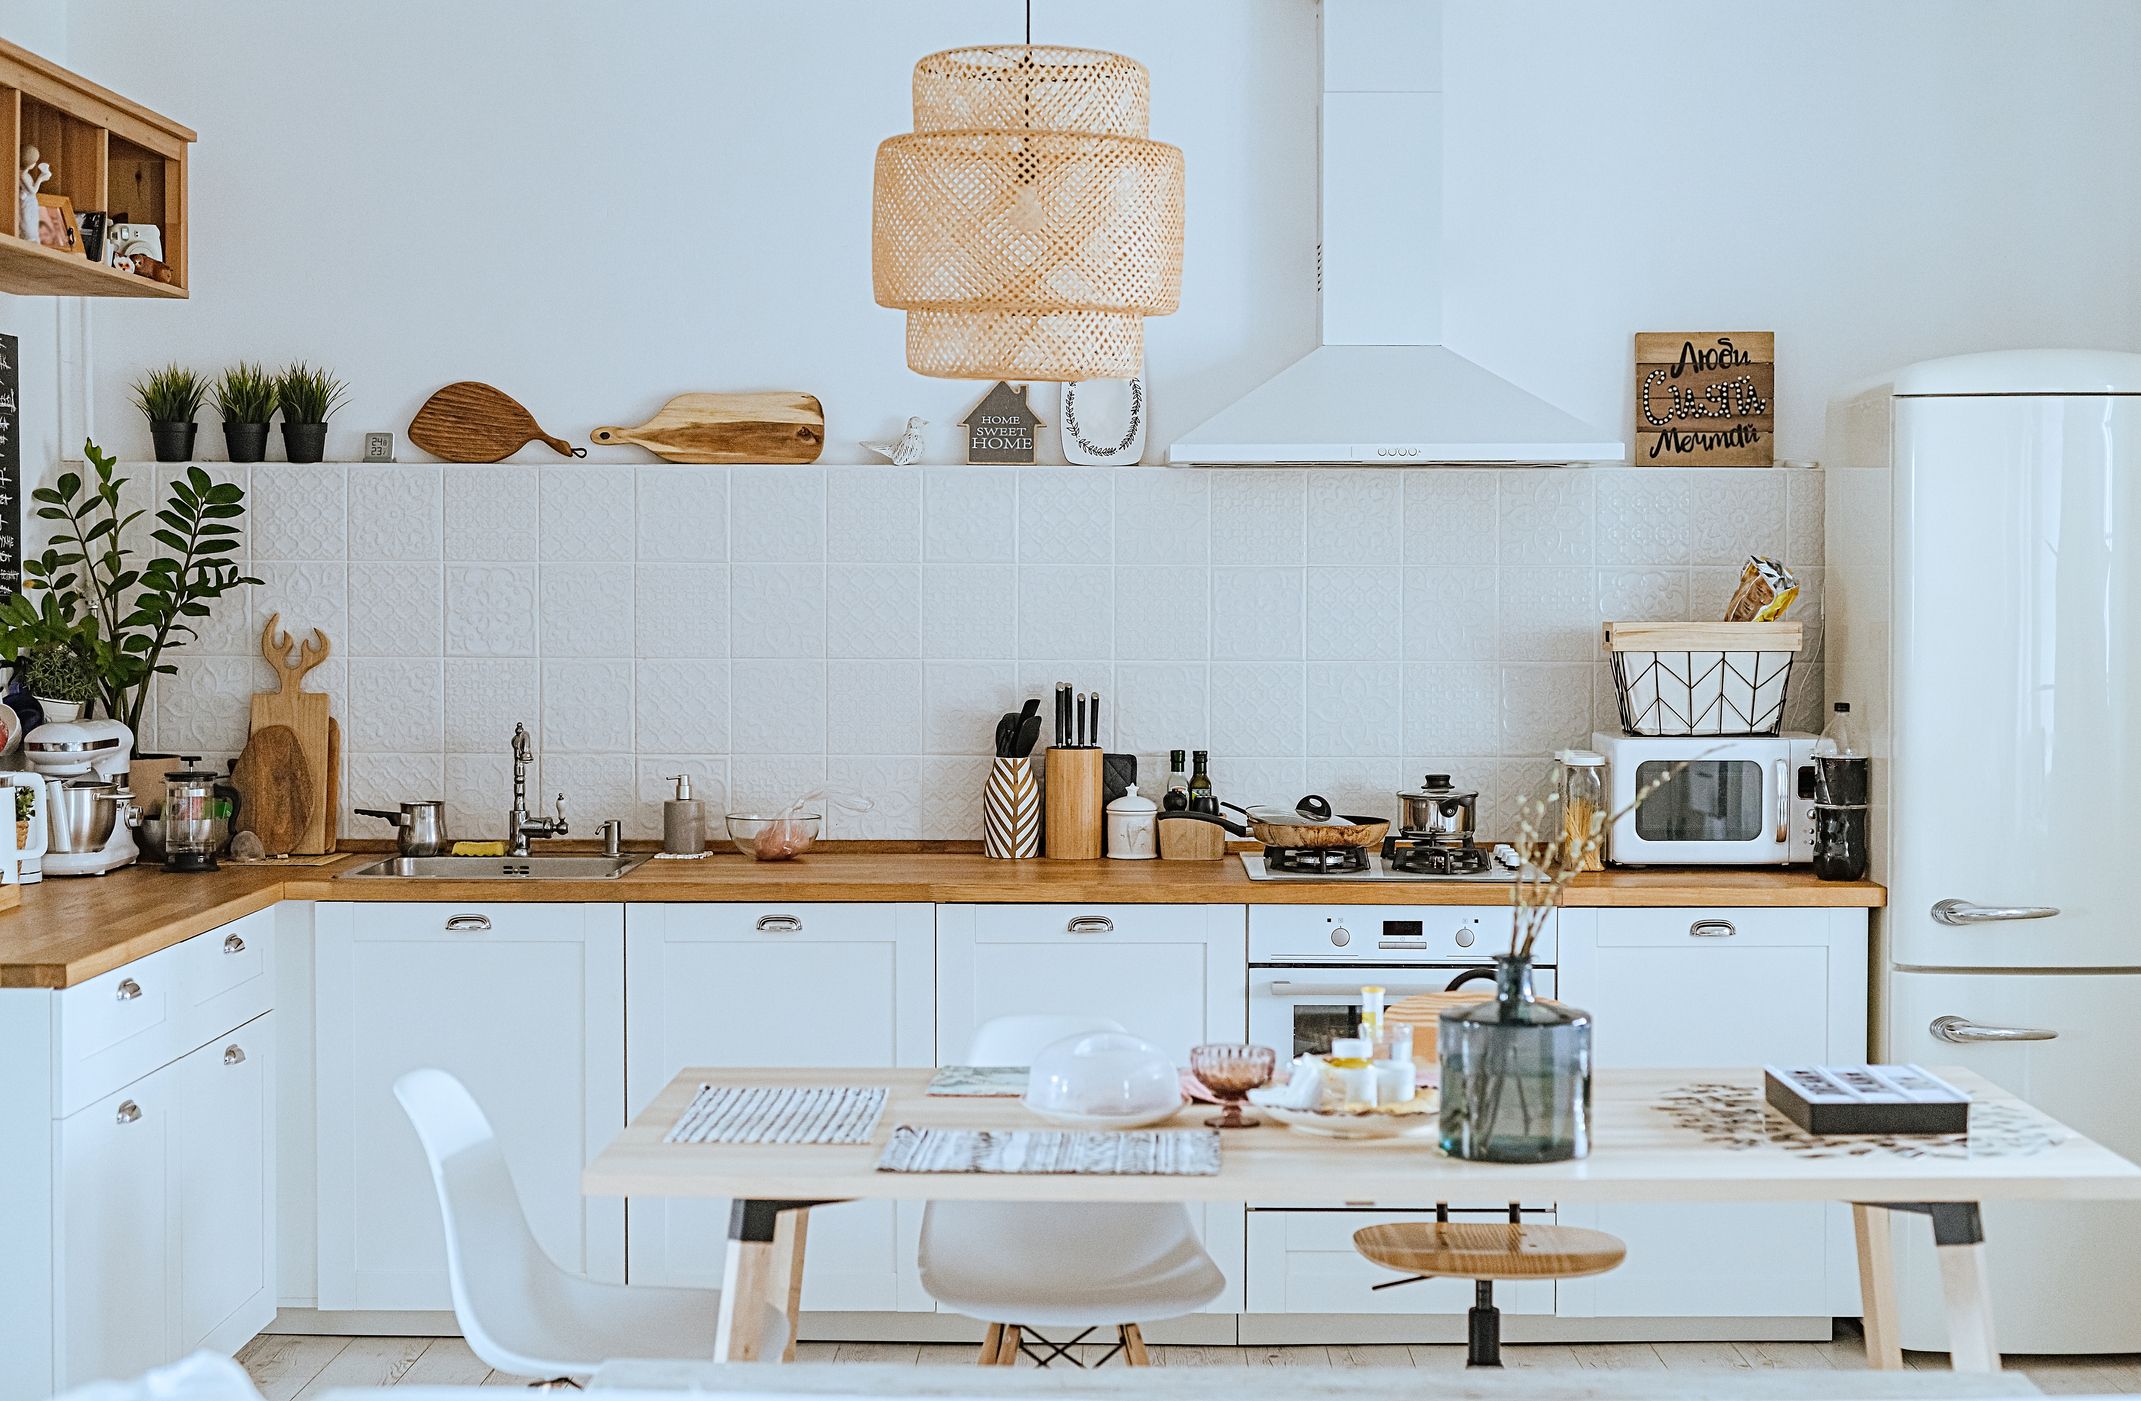 7 Things People With Clean Kitchens Do Daily